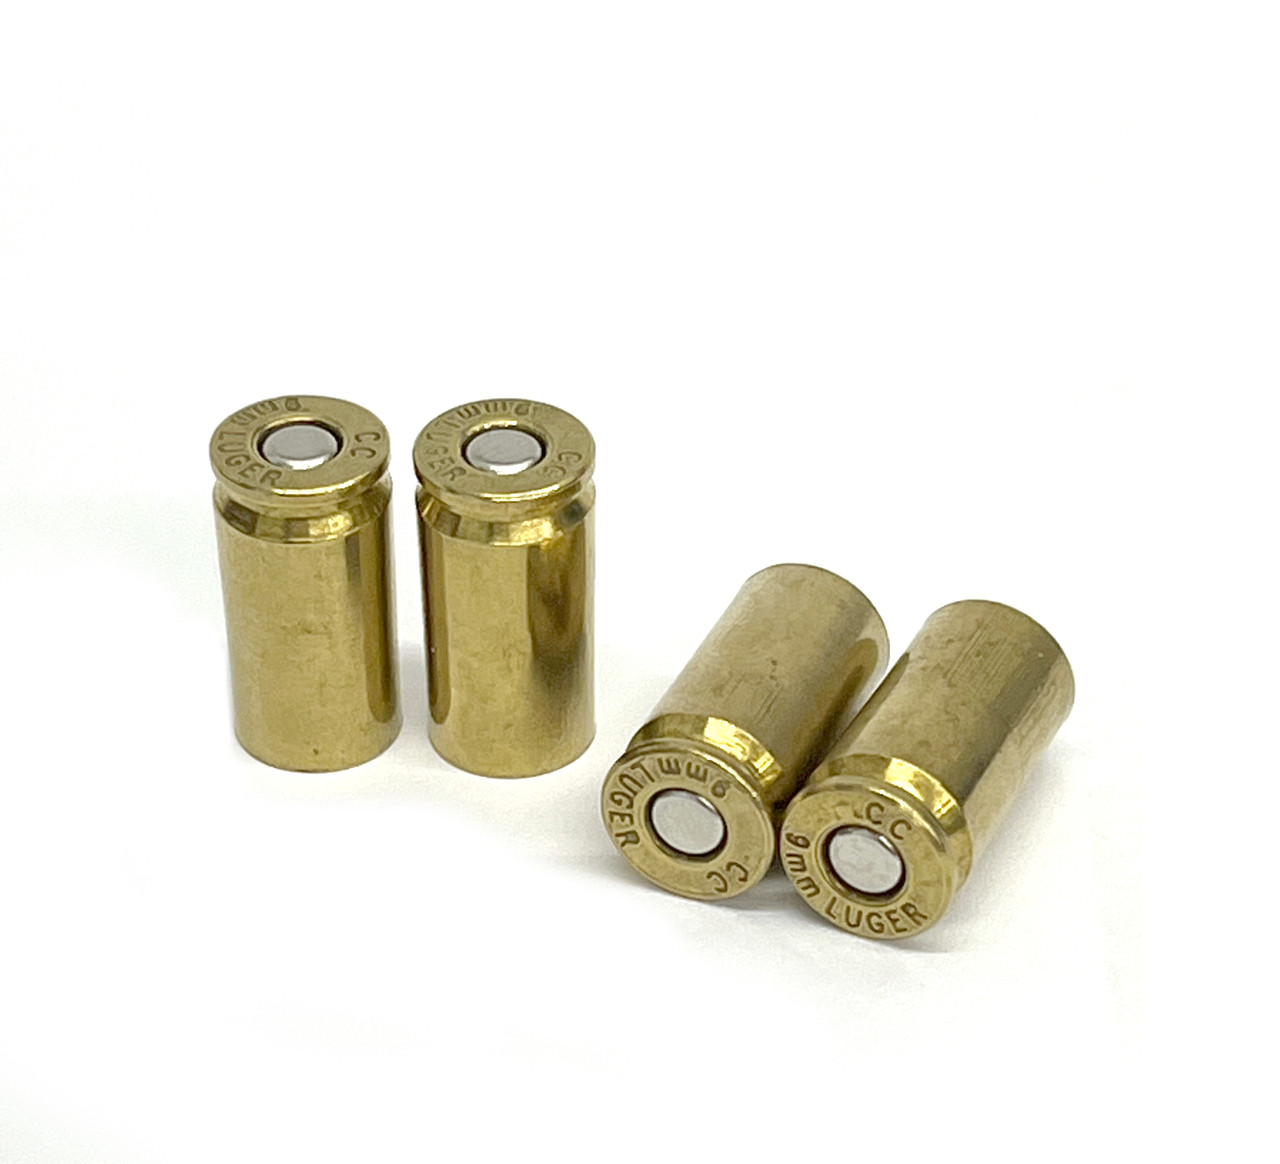 9MM BRASS - PRIMED PROCESSED – Lakeshore Ammunition